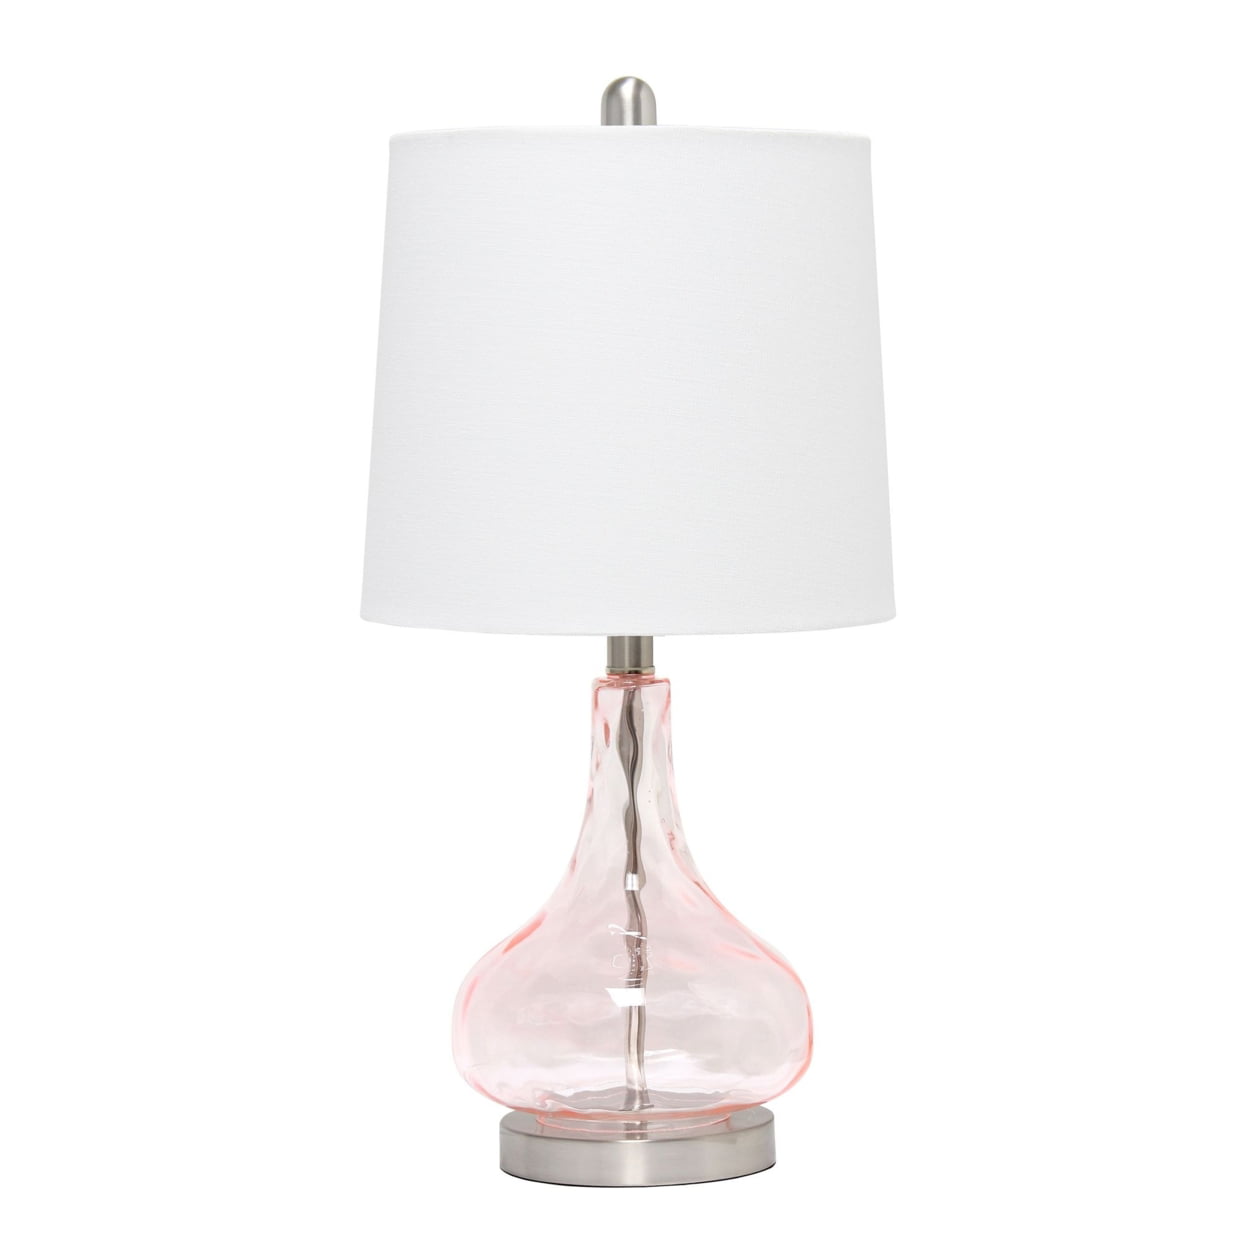 Lalia Home Rippled Glass Table Lamp with Fabric Shade -  Rose Quartz